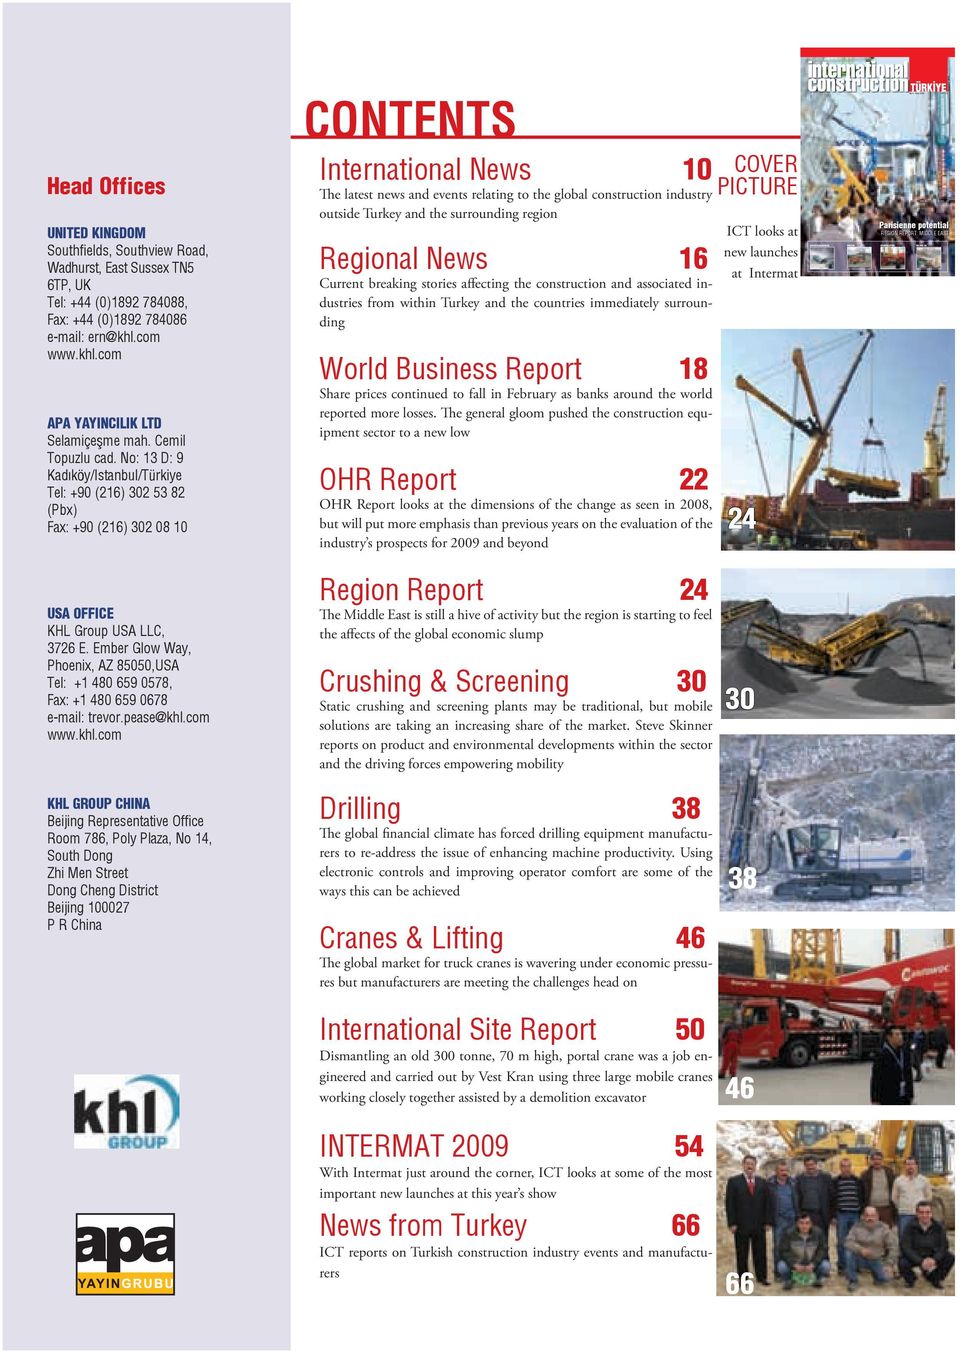 No: 13 D: 9 Kadıköy/Istanbul/Türkiye Tel: +90 (216) 302 53 82 (Pbx) Fax: +90 (216) 302 08 10 CONTENTS International News 10 The latest news and events relating to the global construction industry